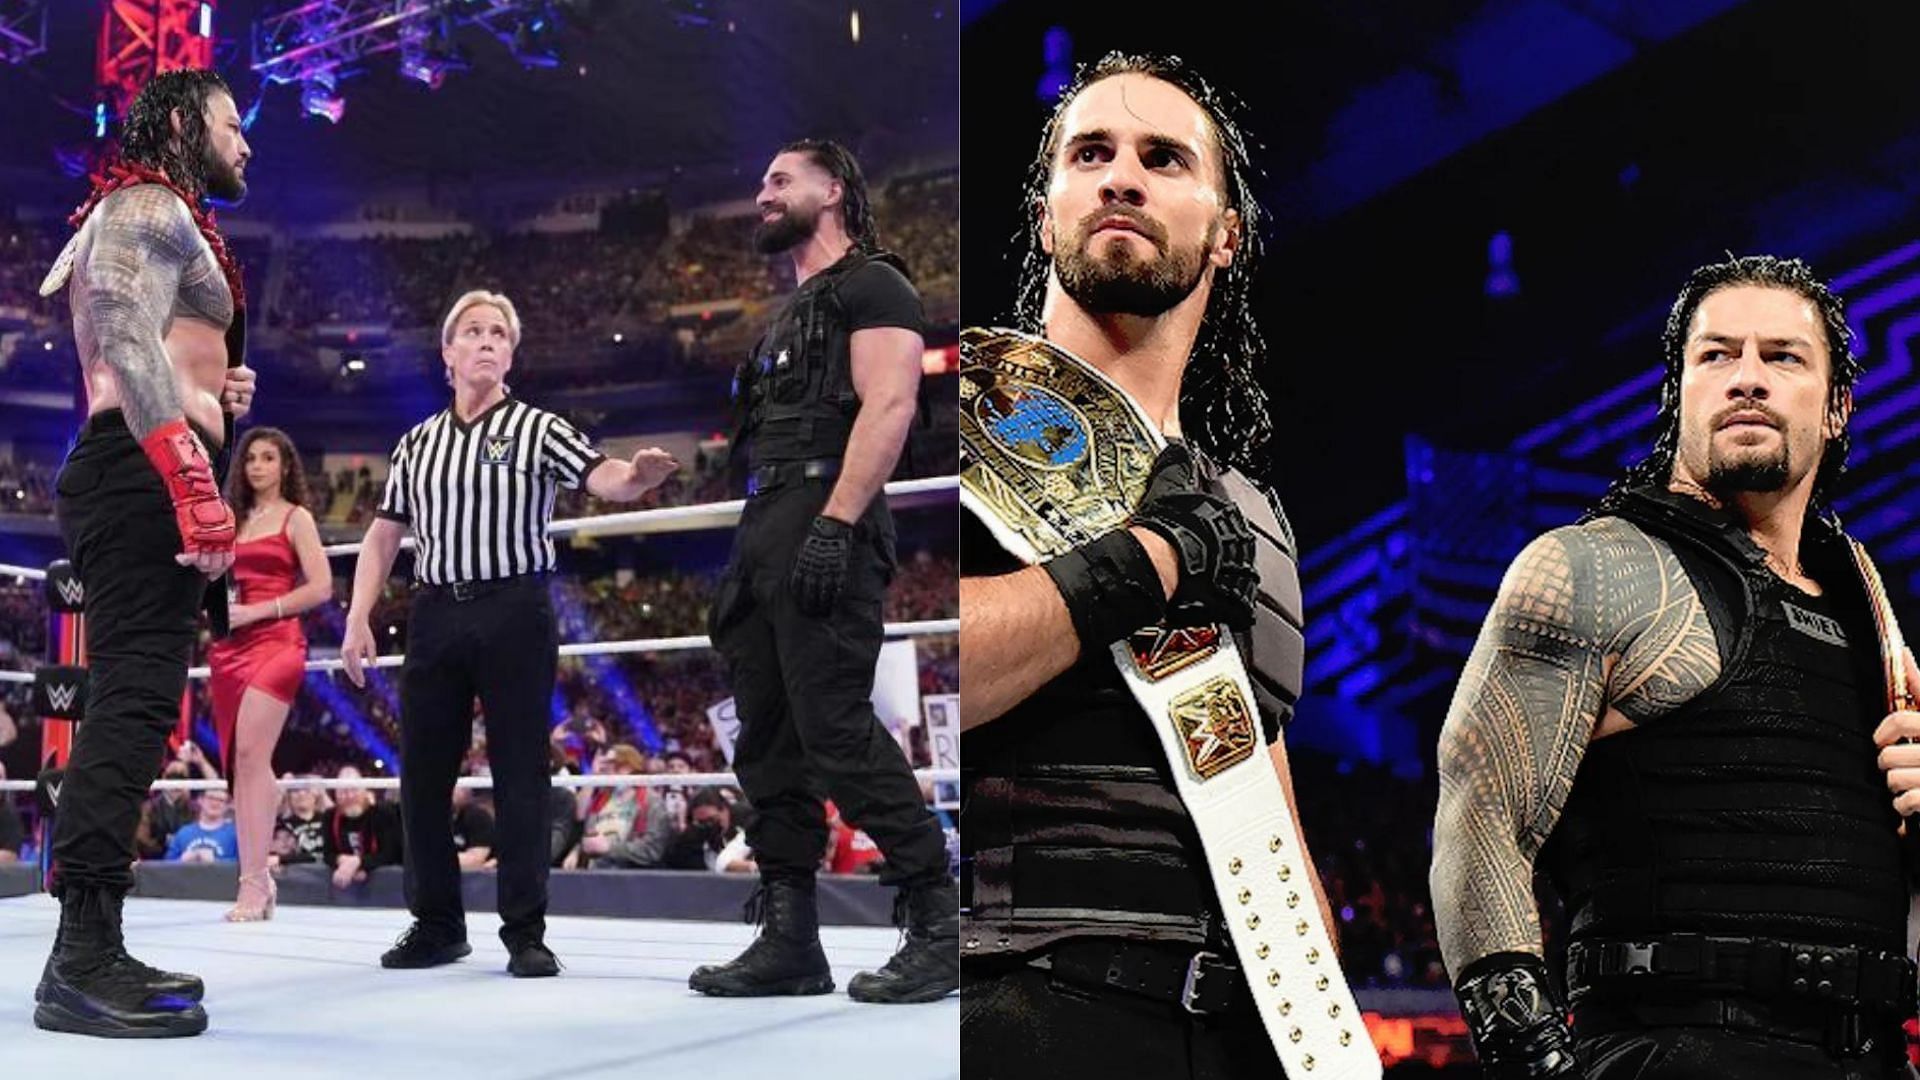 Seth Rollins and Roman Reigns are no strangers to one another